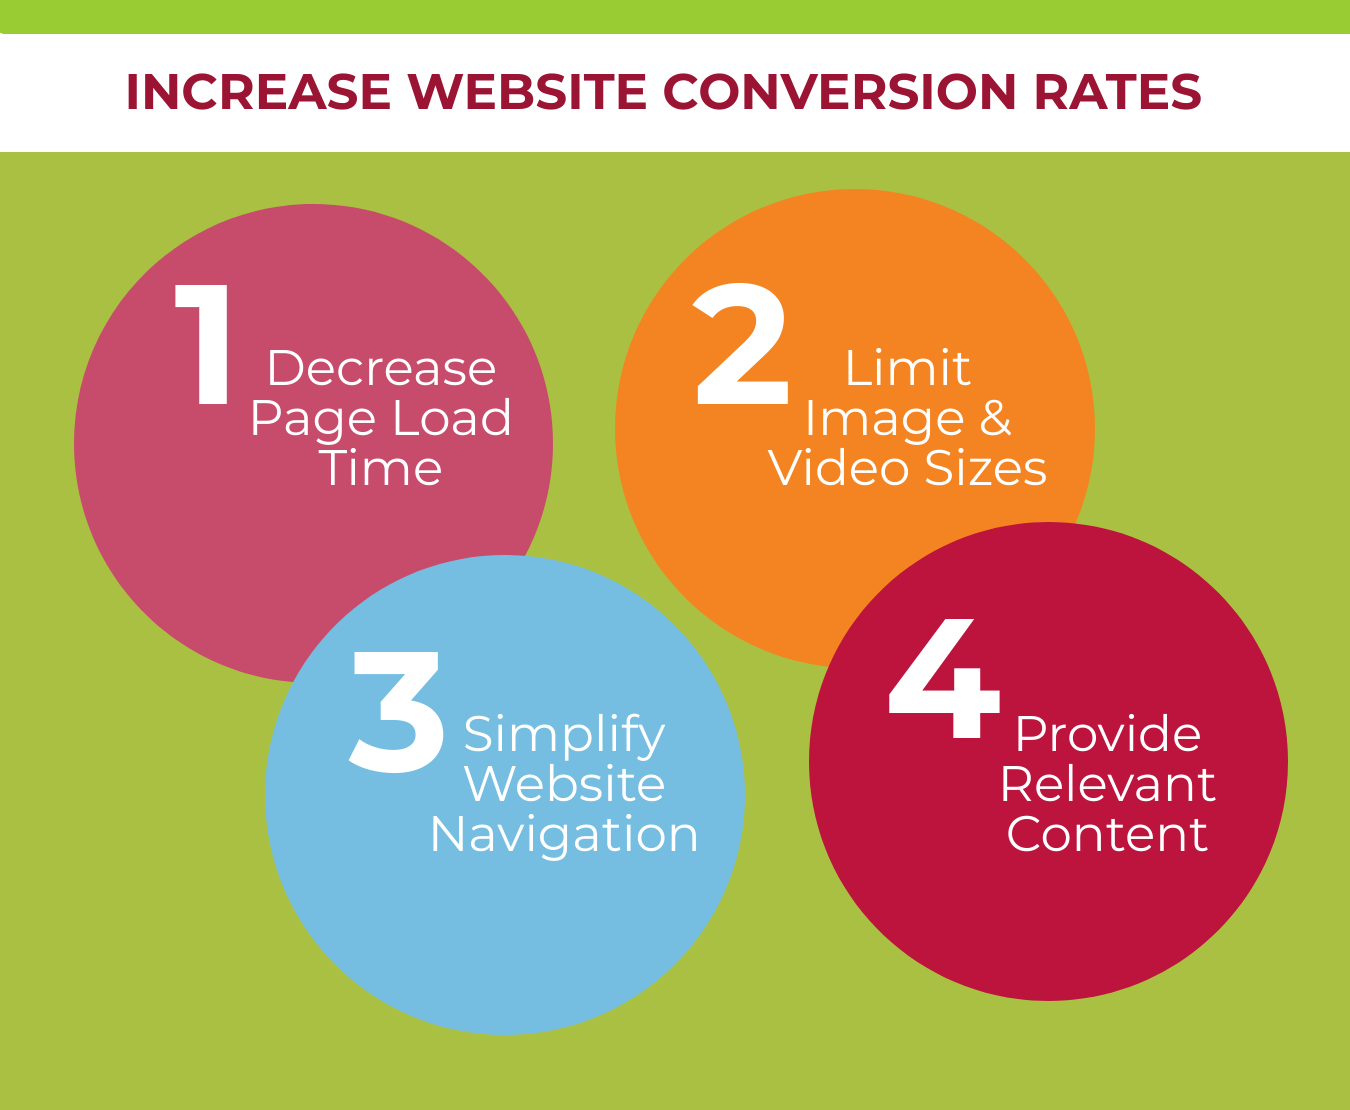 Increase Website Conversion Rates four ways to boost conversion - Decrease page time. Limit Image and Video Sizes. Simplifiy Website Navigation. Provide Relevant Content.